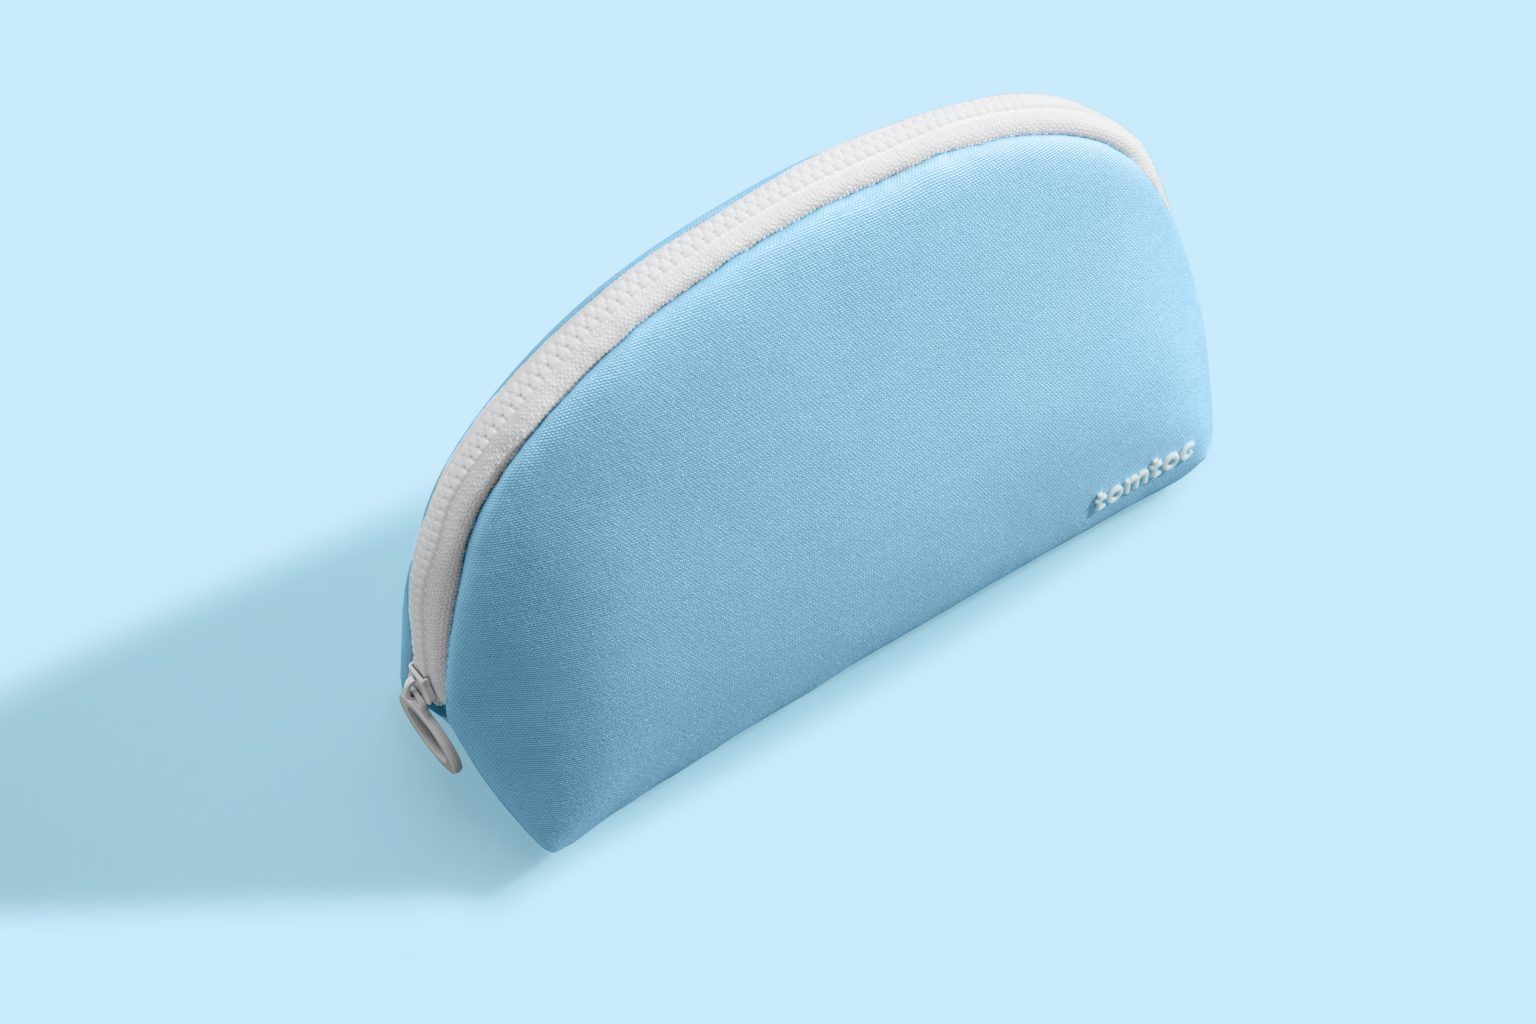  Túi Chống Sốc Tomtoc Shell Pouch MacBook/Laptop 13” - Blue 